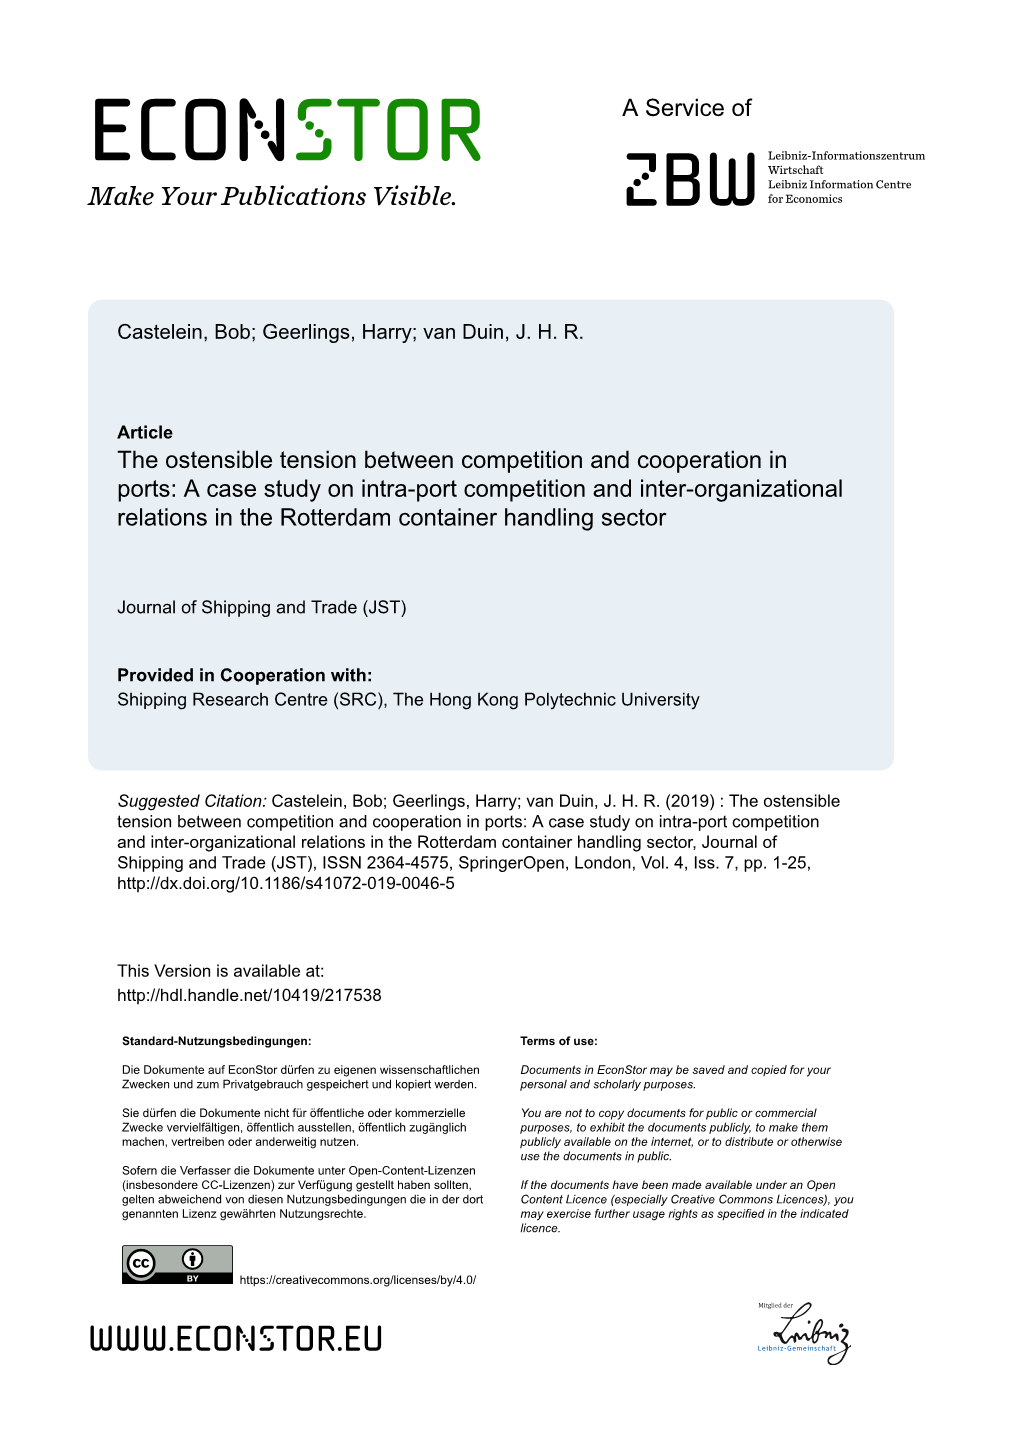 A Case Study on Intra-Port Competition and Inter-Organizational Relations in the Rotterdam Container Handling Sector